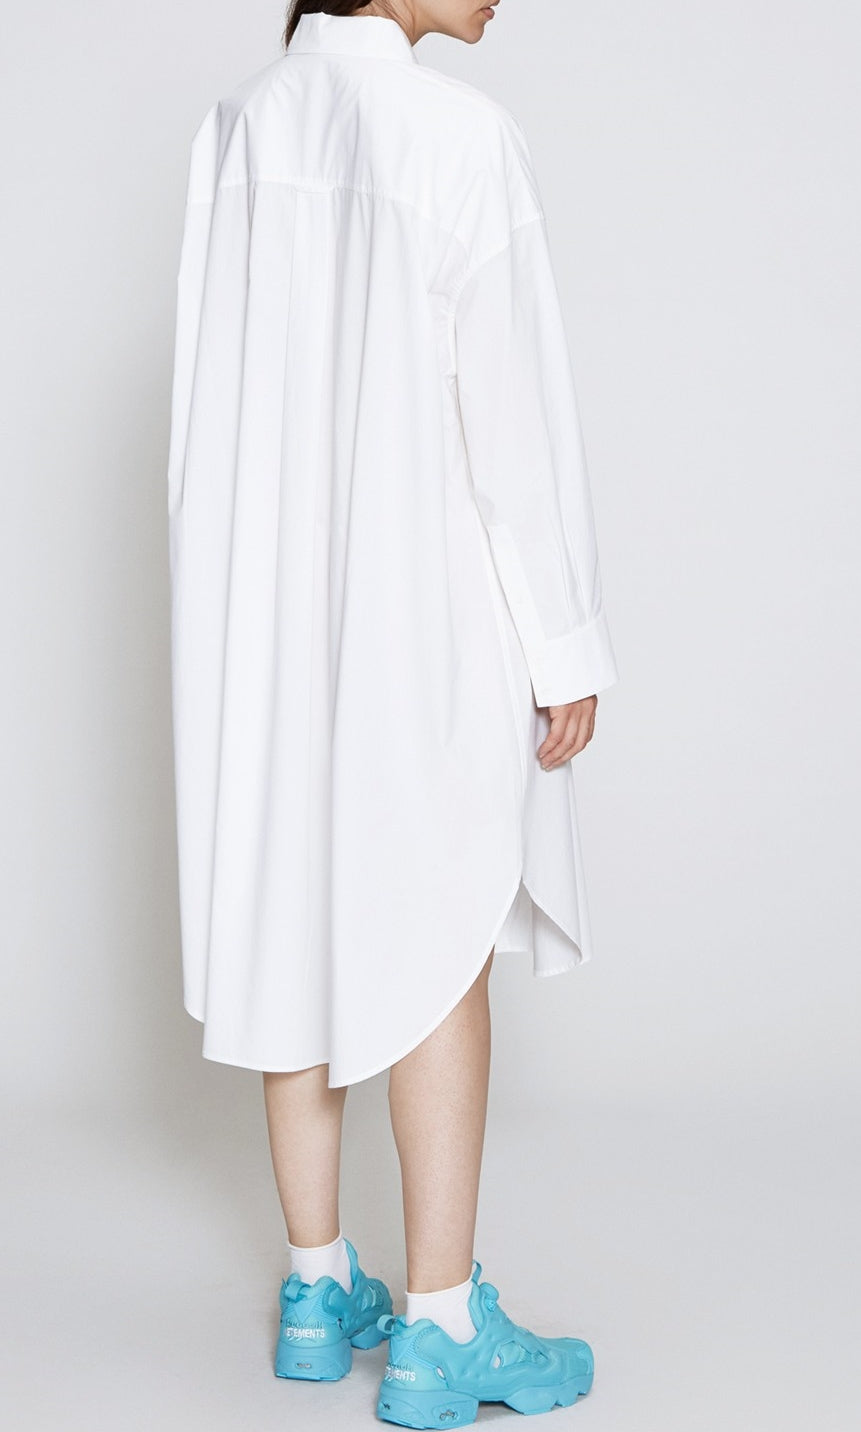 Oversized Shirtdress in Crisp Black Poplin / Pointed collar / Dropped Shoulders / Long sleeves with pleated wrist